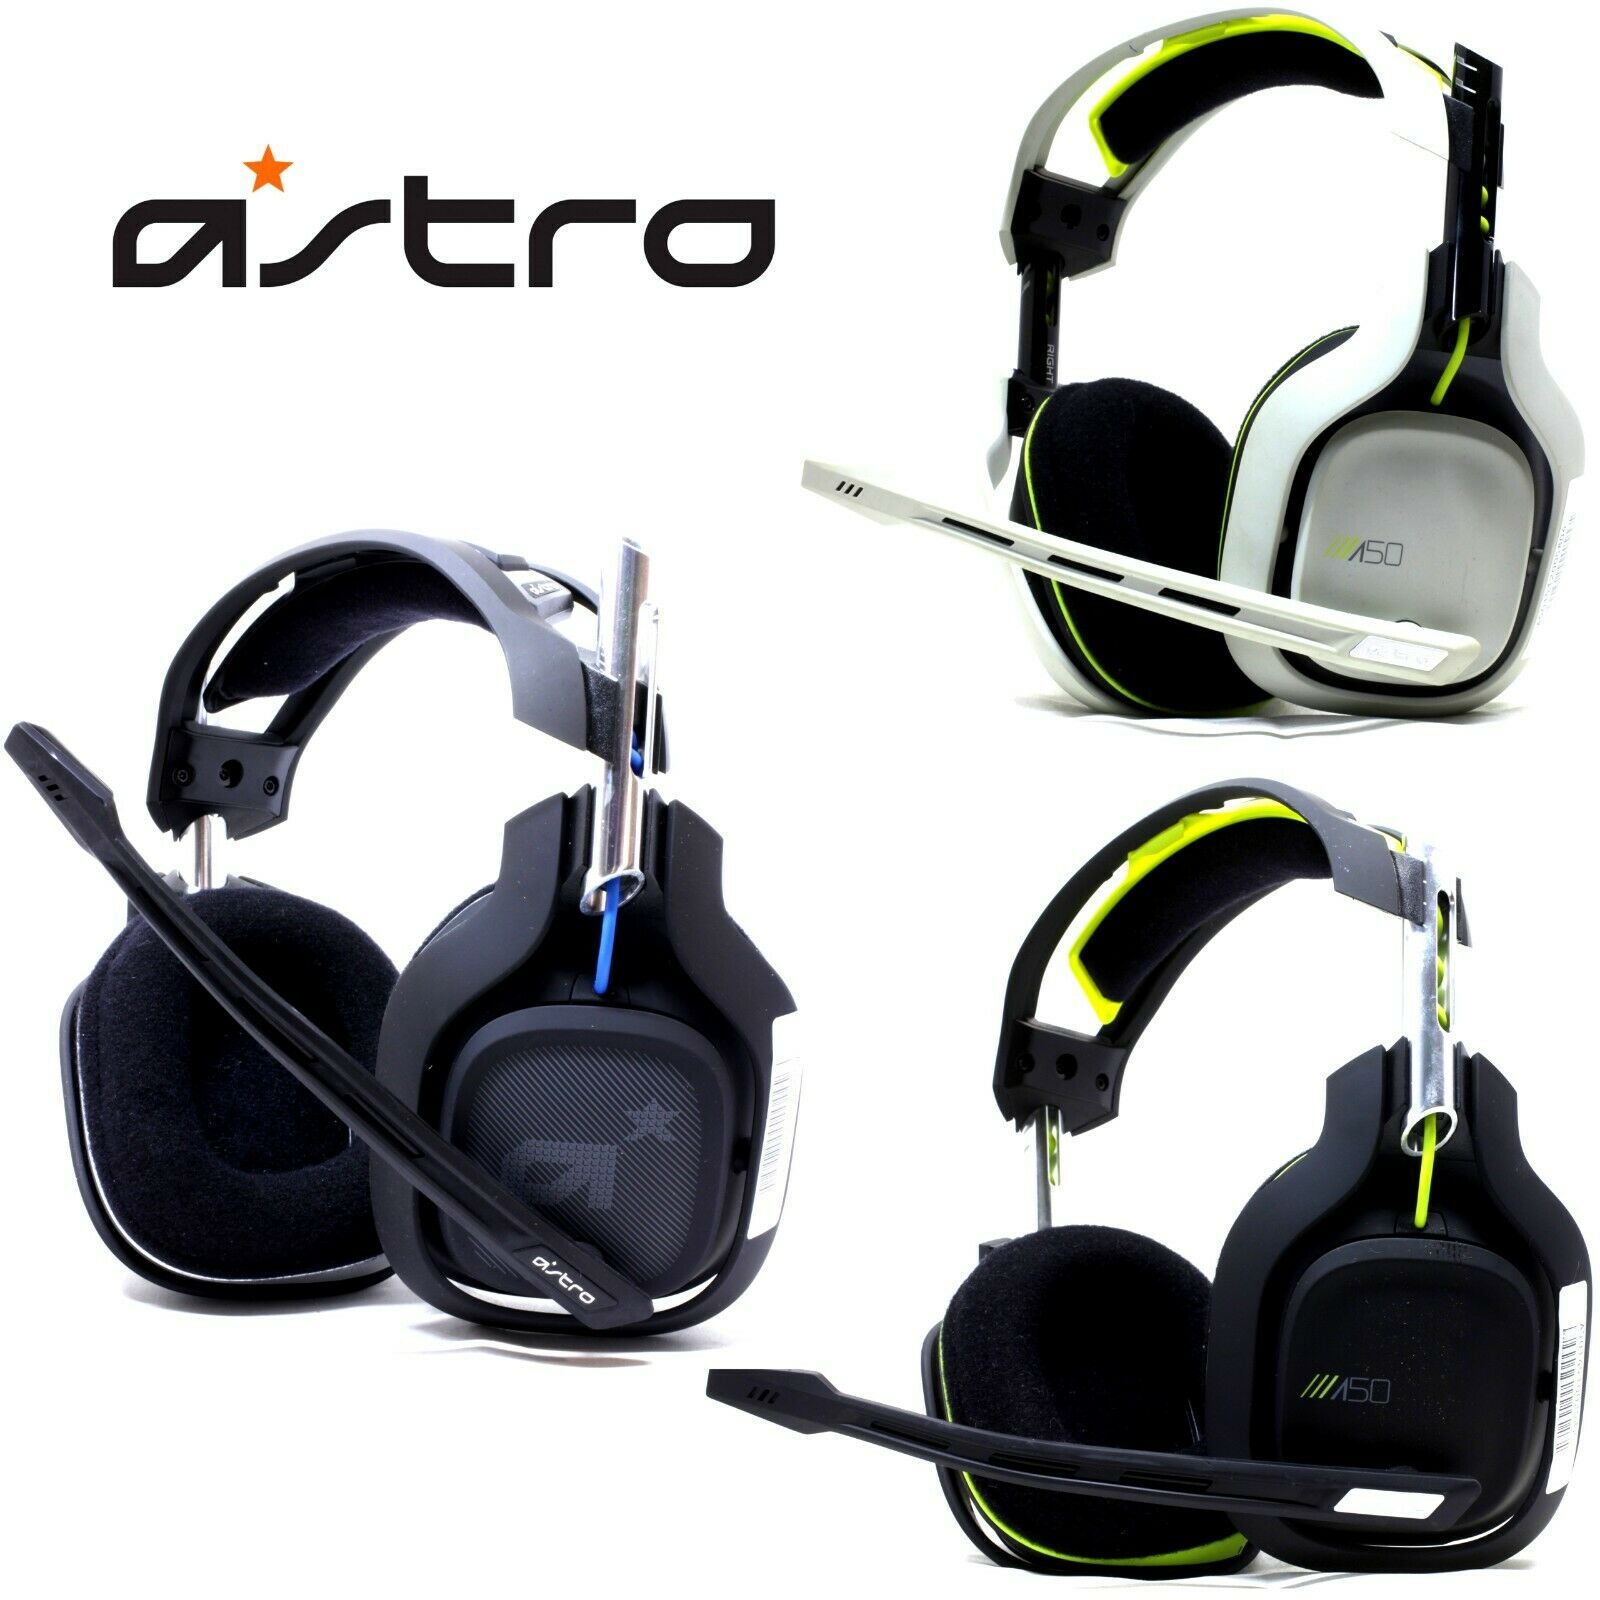 Astro A50 A50 Gaming Headset Gen 2 Wireless For Xbox One Pc Ps4 Headset Only